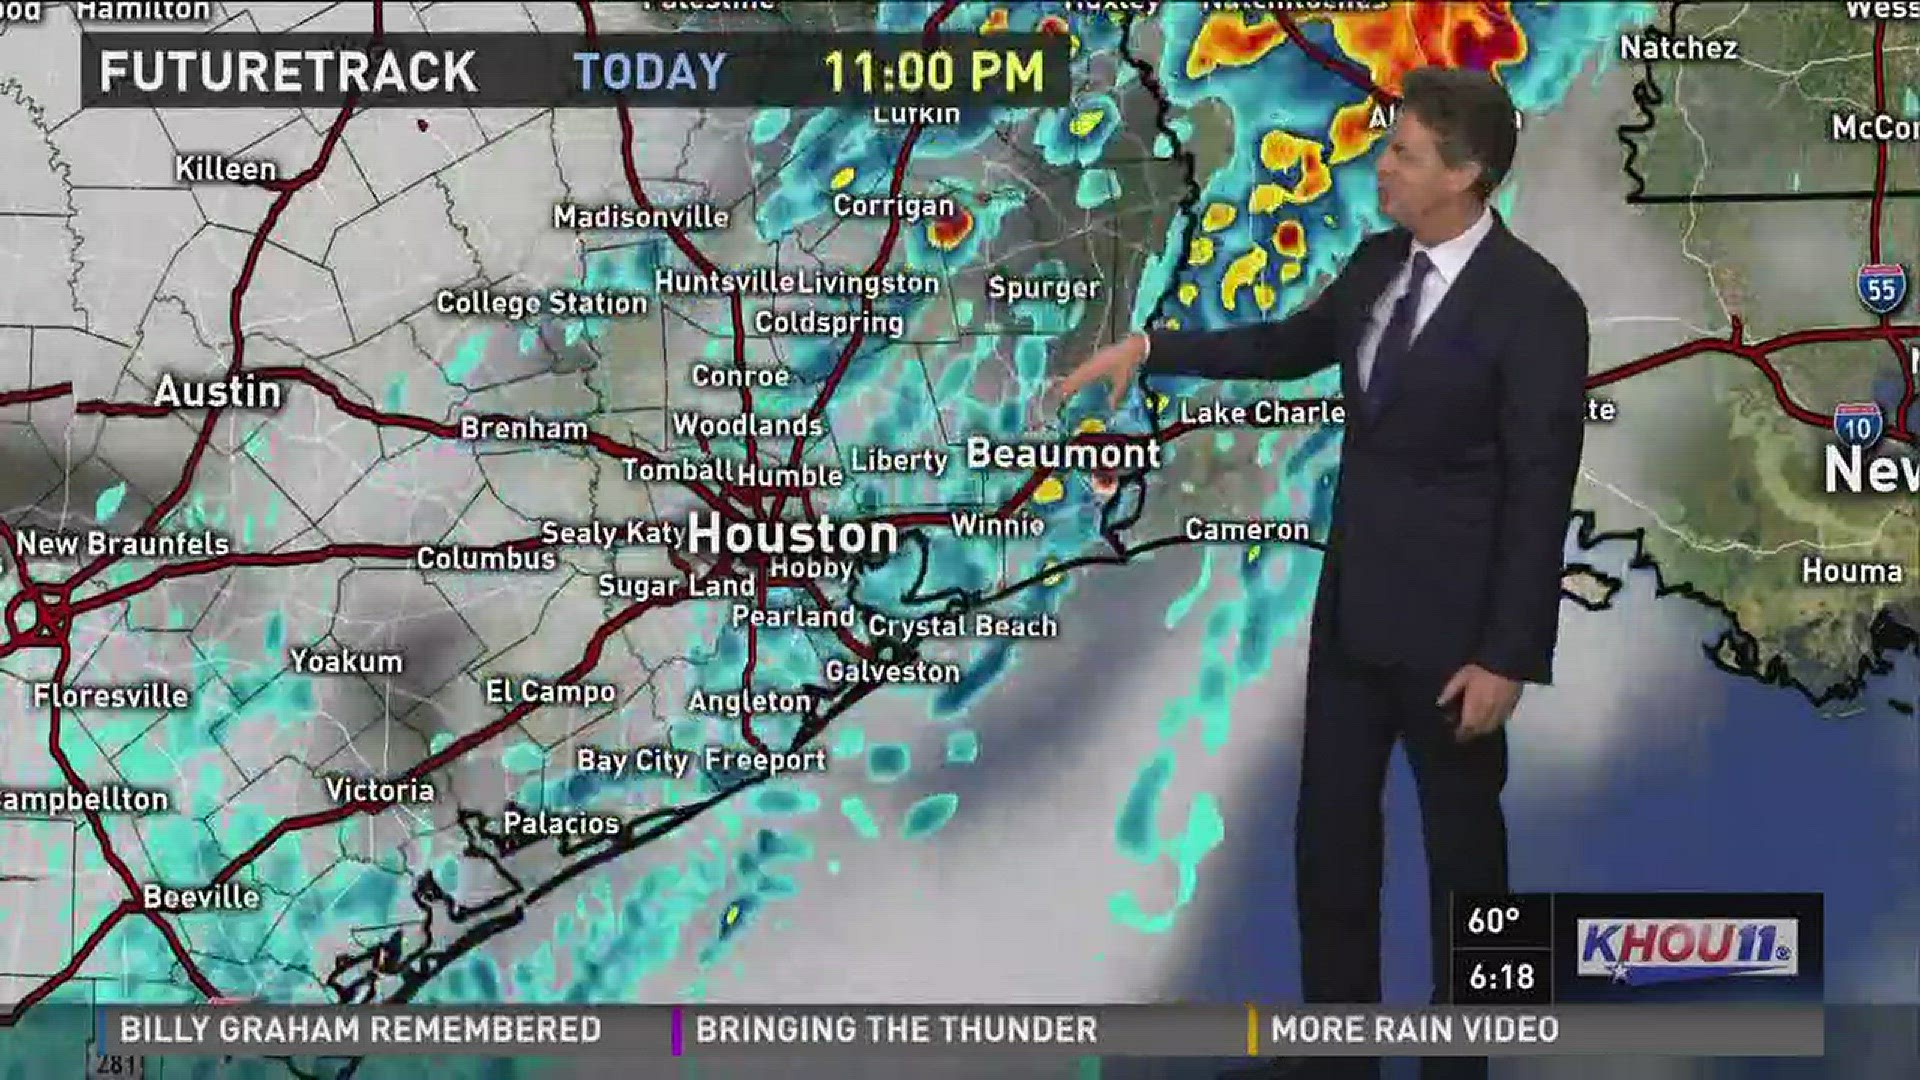 KHOU 11 Chief Meteorologist David Paul says there will be scattered heavy showers Wednesday evening.